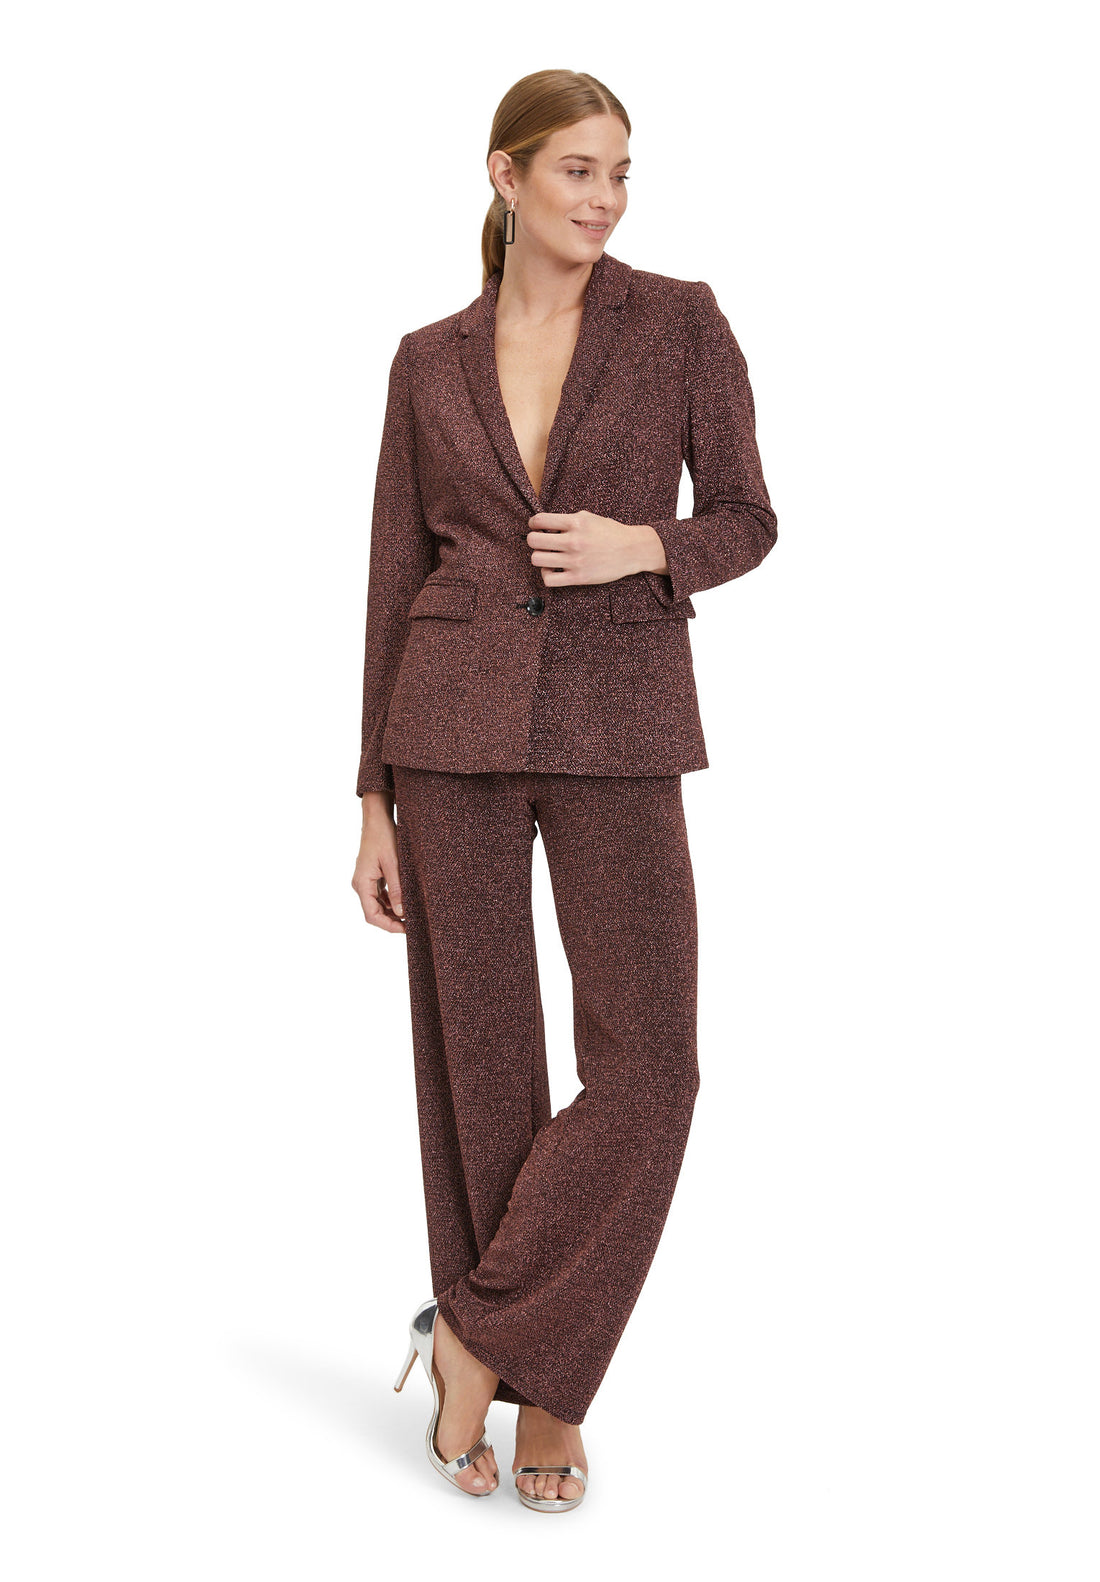 Brown Dress Trousers With Elastic Waistband_3410-4164_9847_01